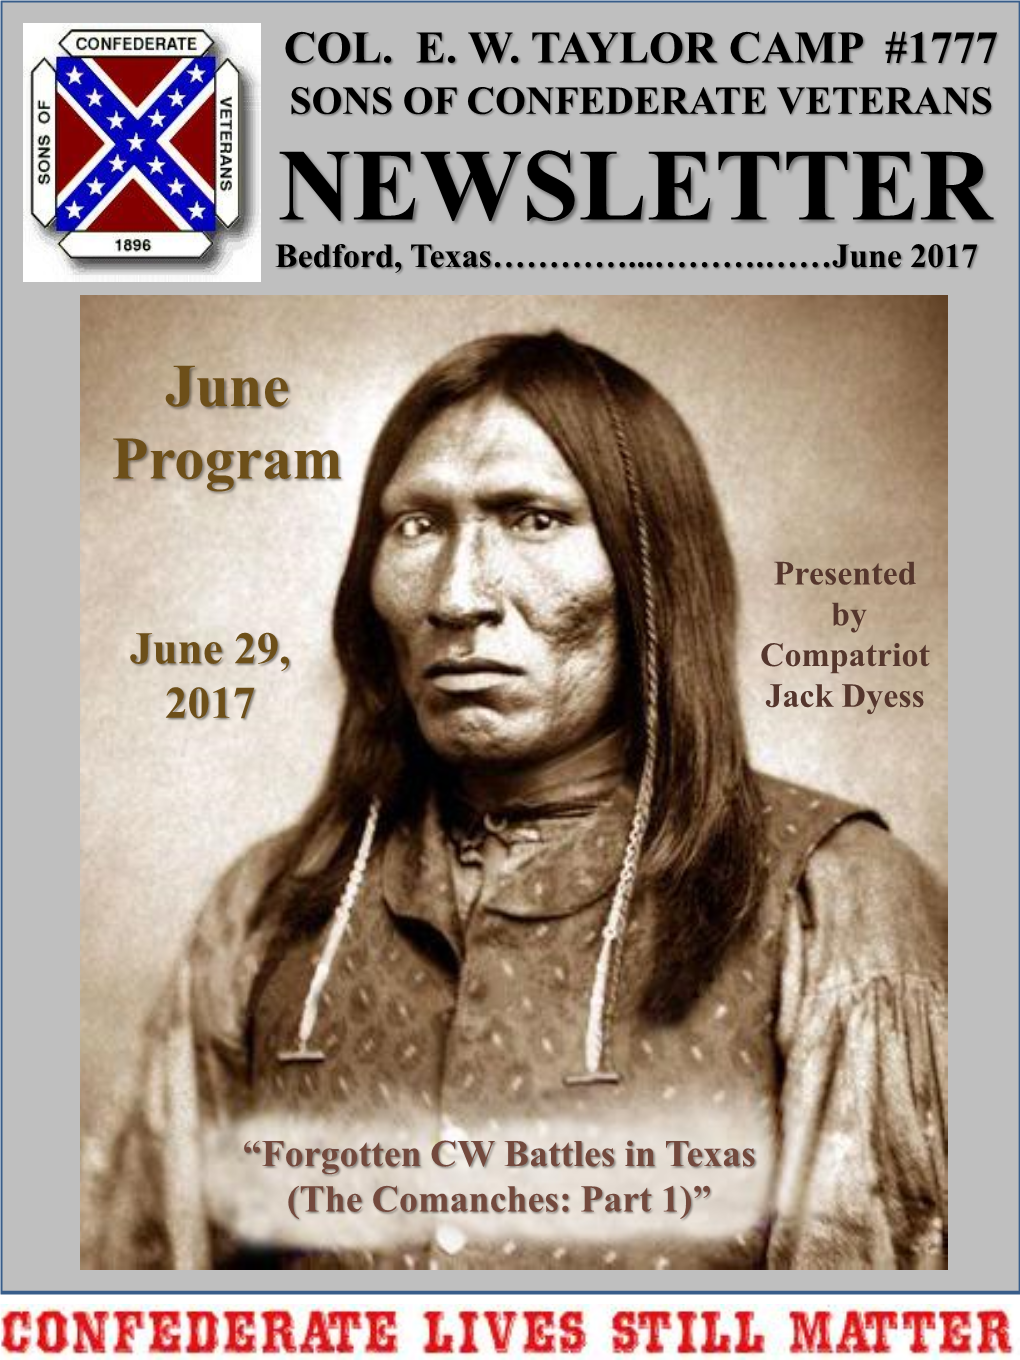 SONS of CONFEDERATE VETERANS NEWSLETTER Bedford, Texas…………...……….……June 2017